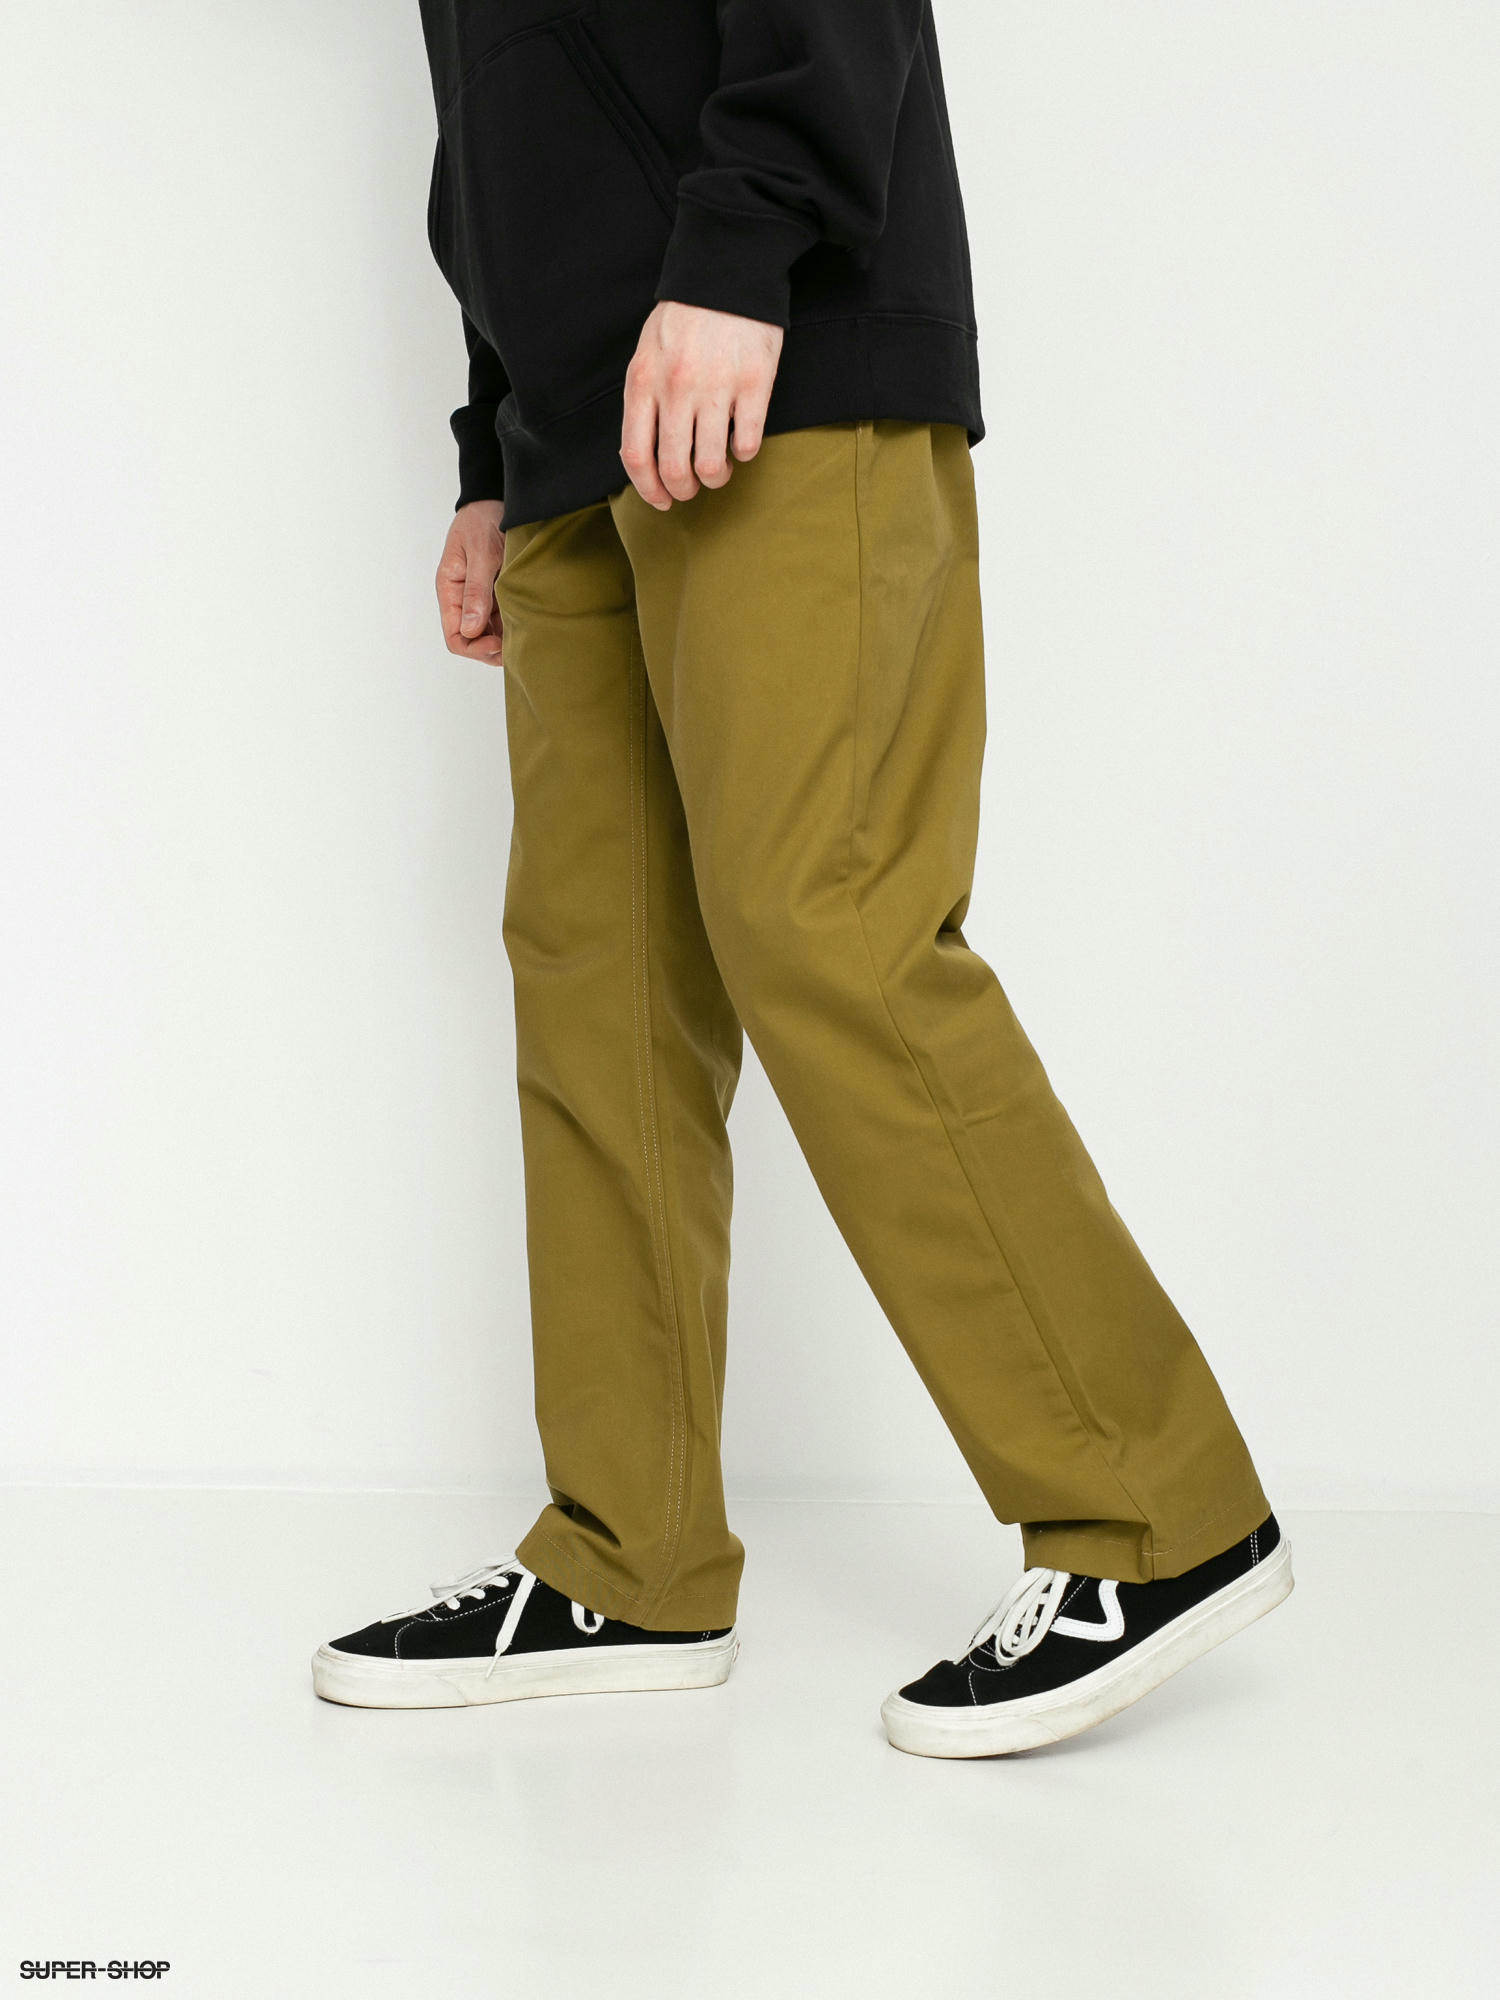 Vans Authentic Chino Relaxed Pants (nutria)